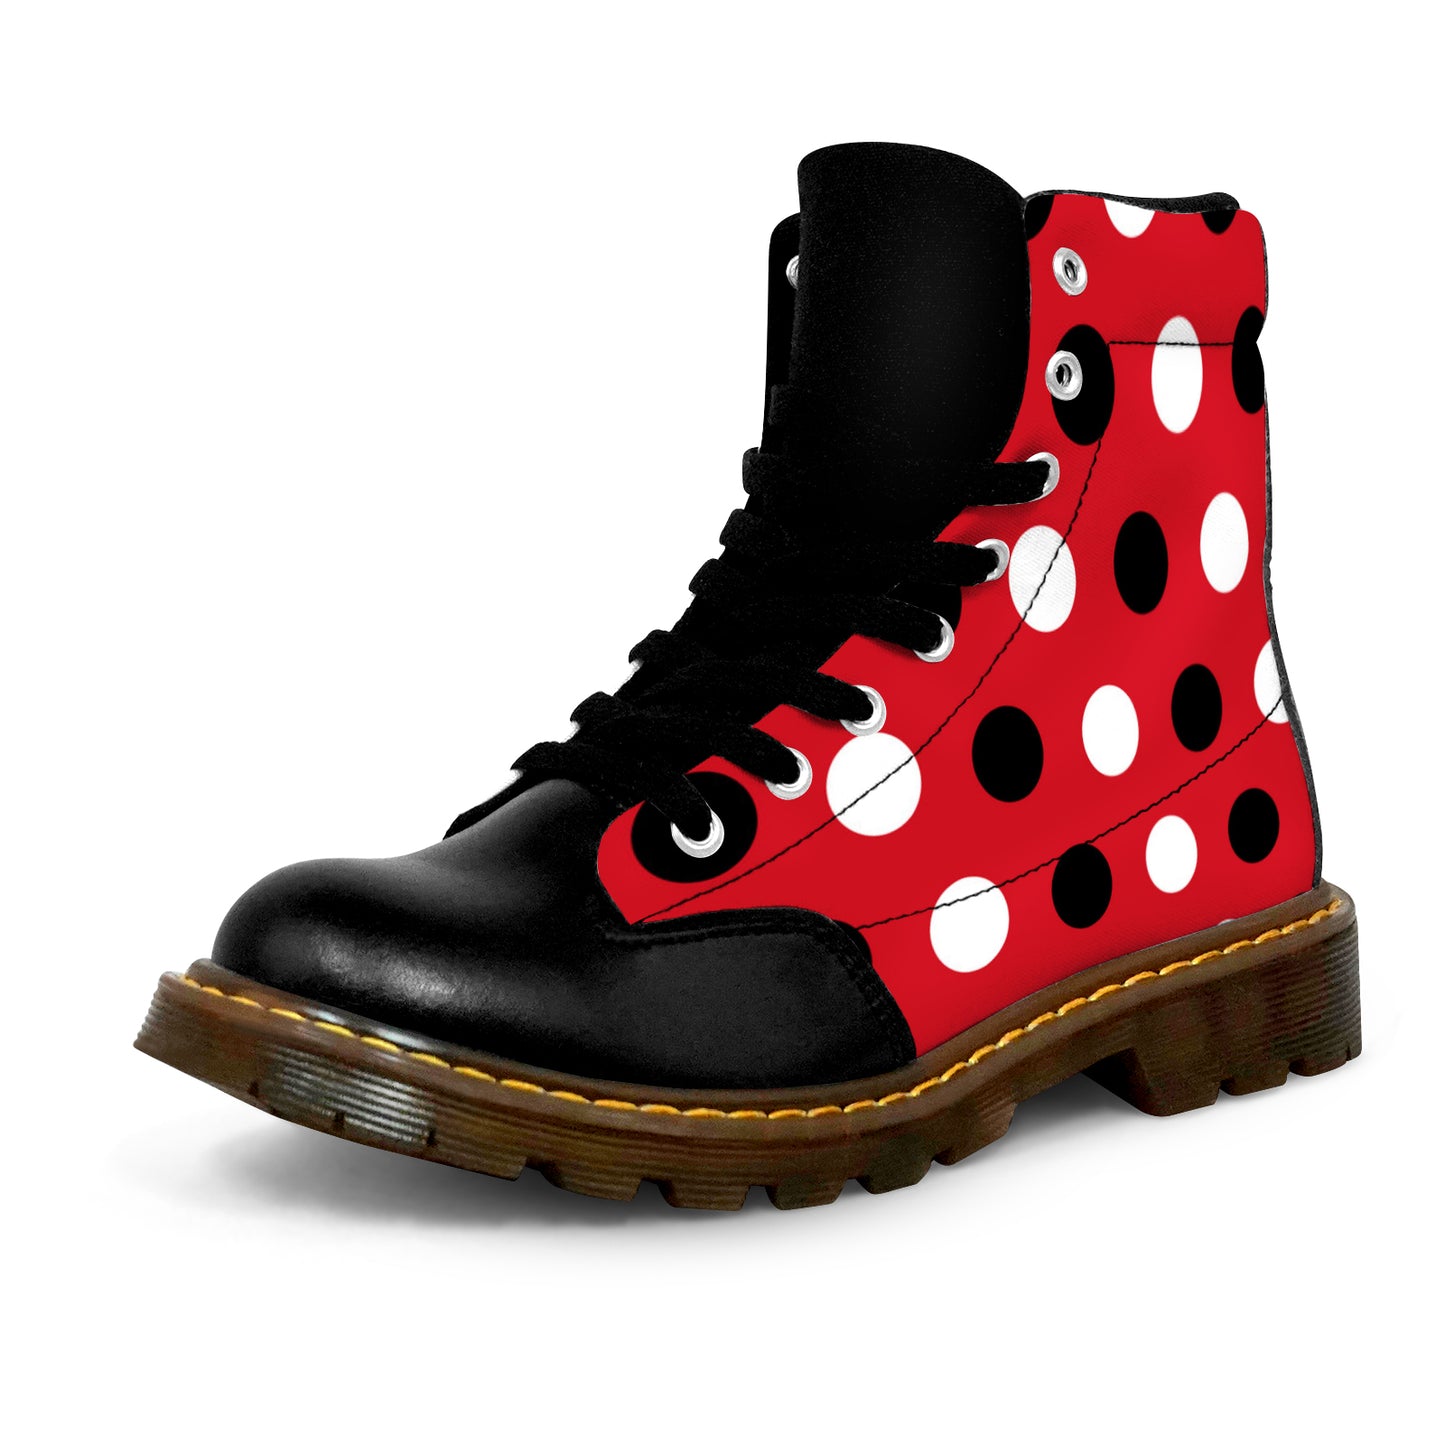 Winter Round Toe Women's Boots - Red Polka Dot